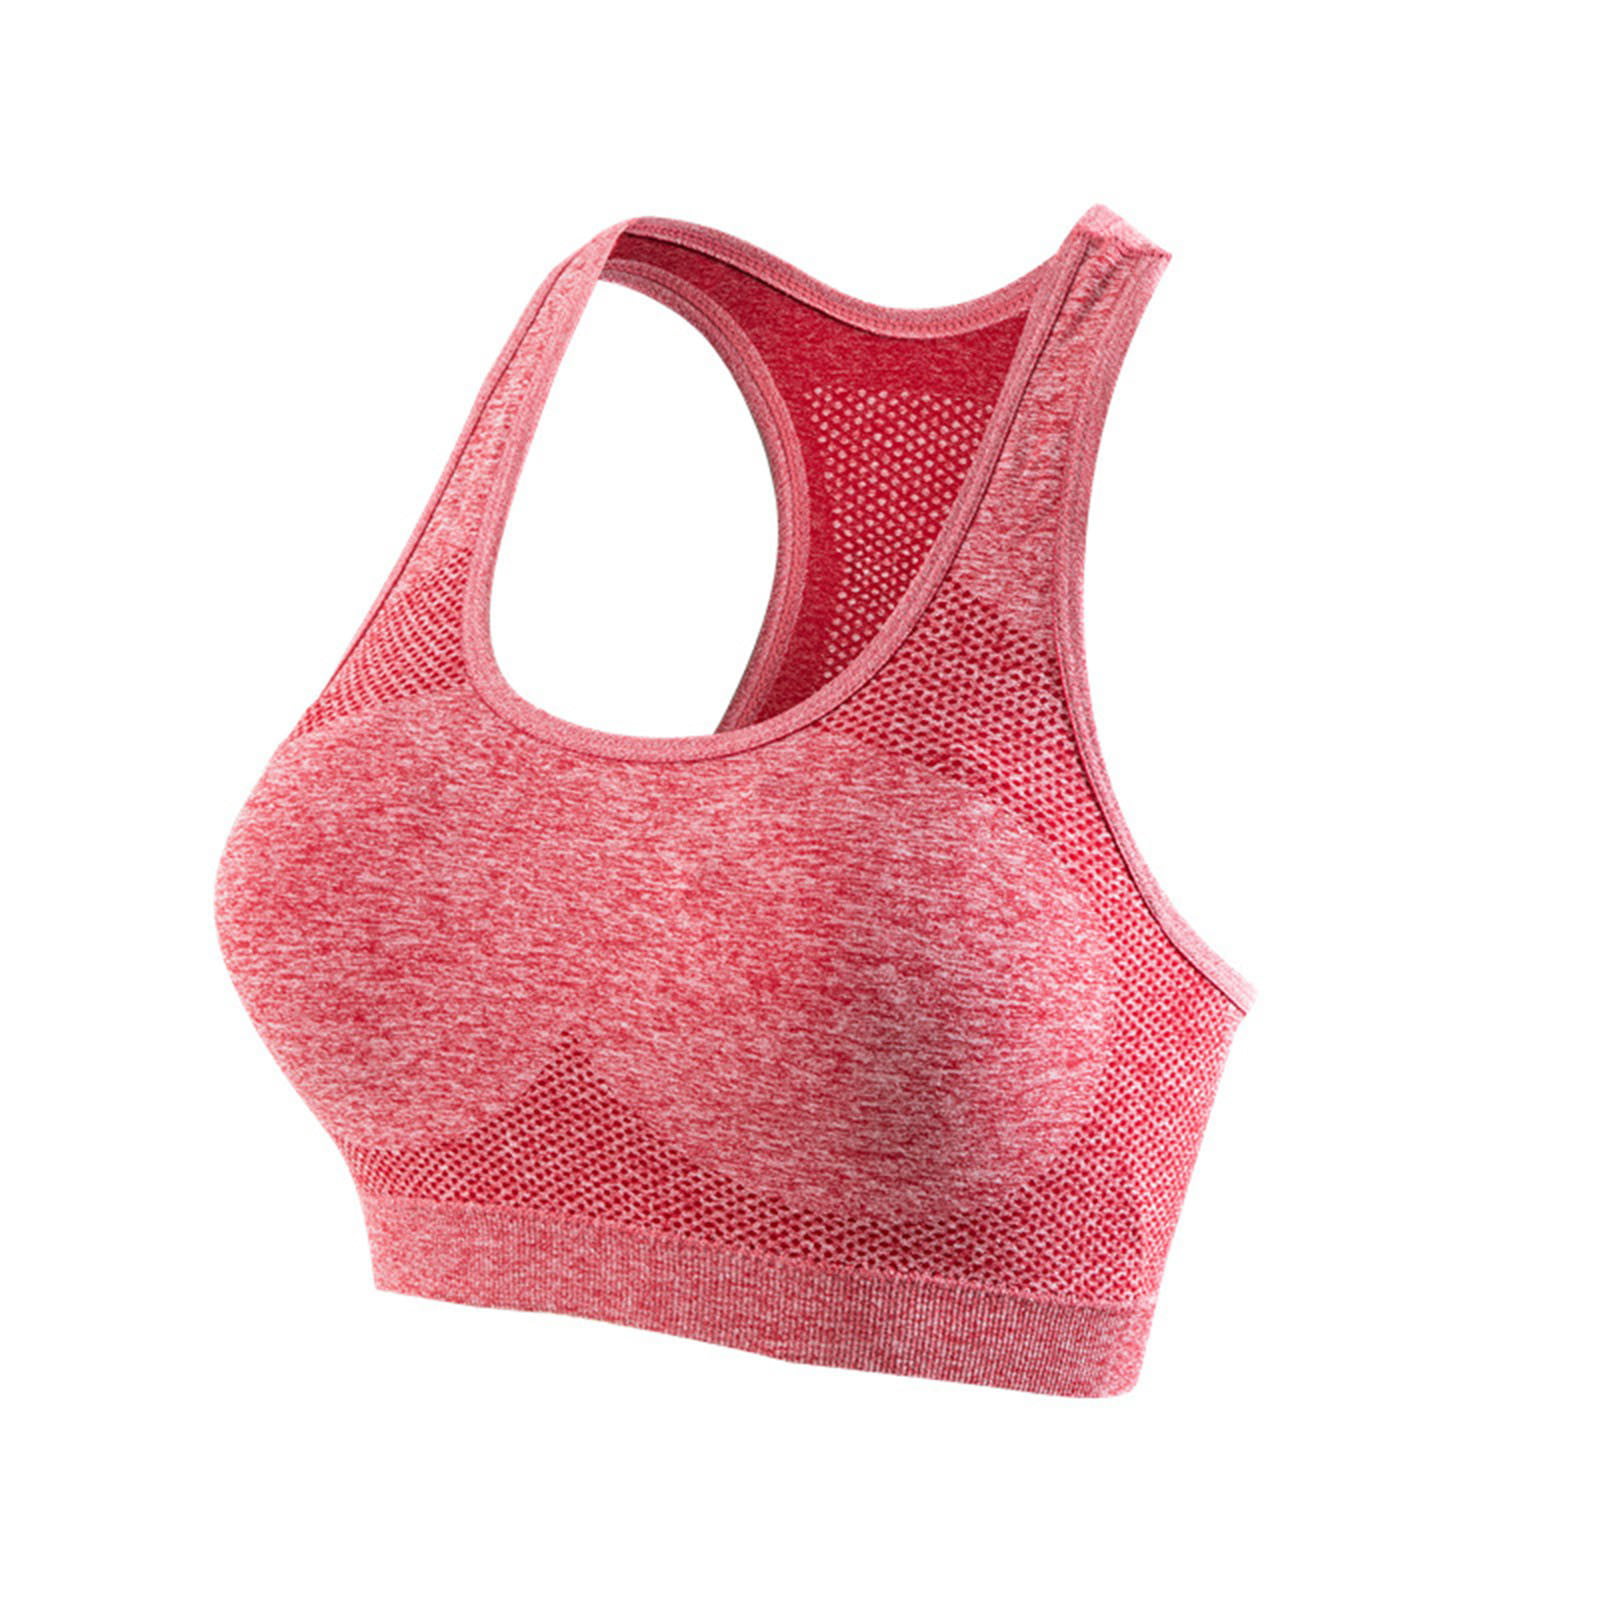 Womens Sexy Yoga Sports Bra, Red Push Up Padded Fitness Gym Workout Tank Top  Crop Top From Xiadou_trading, $8.04